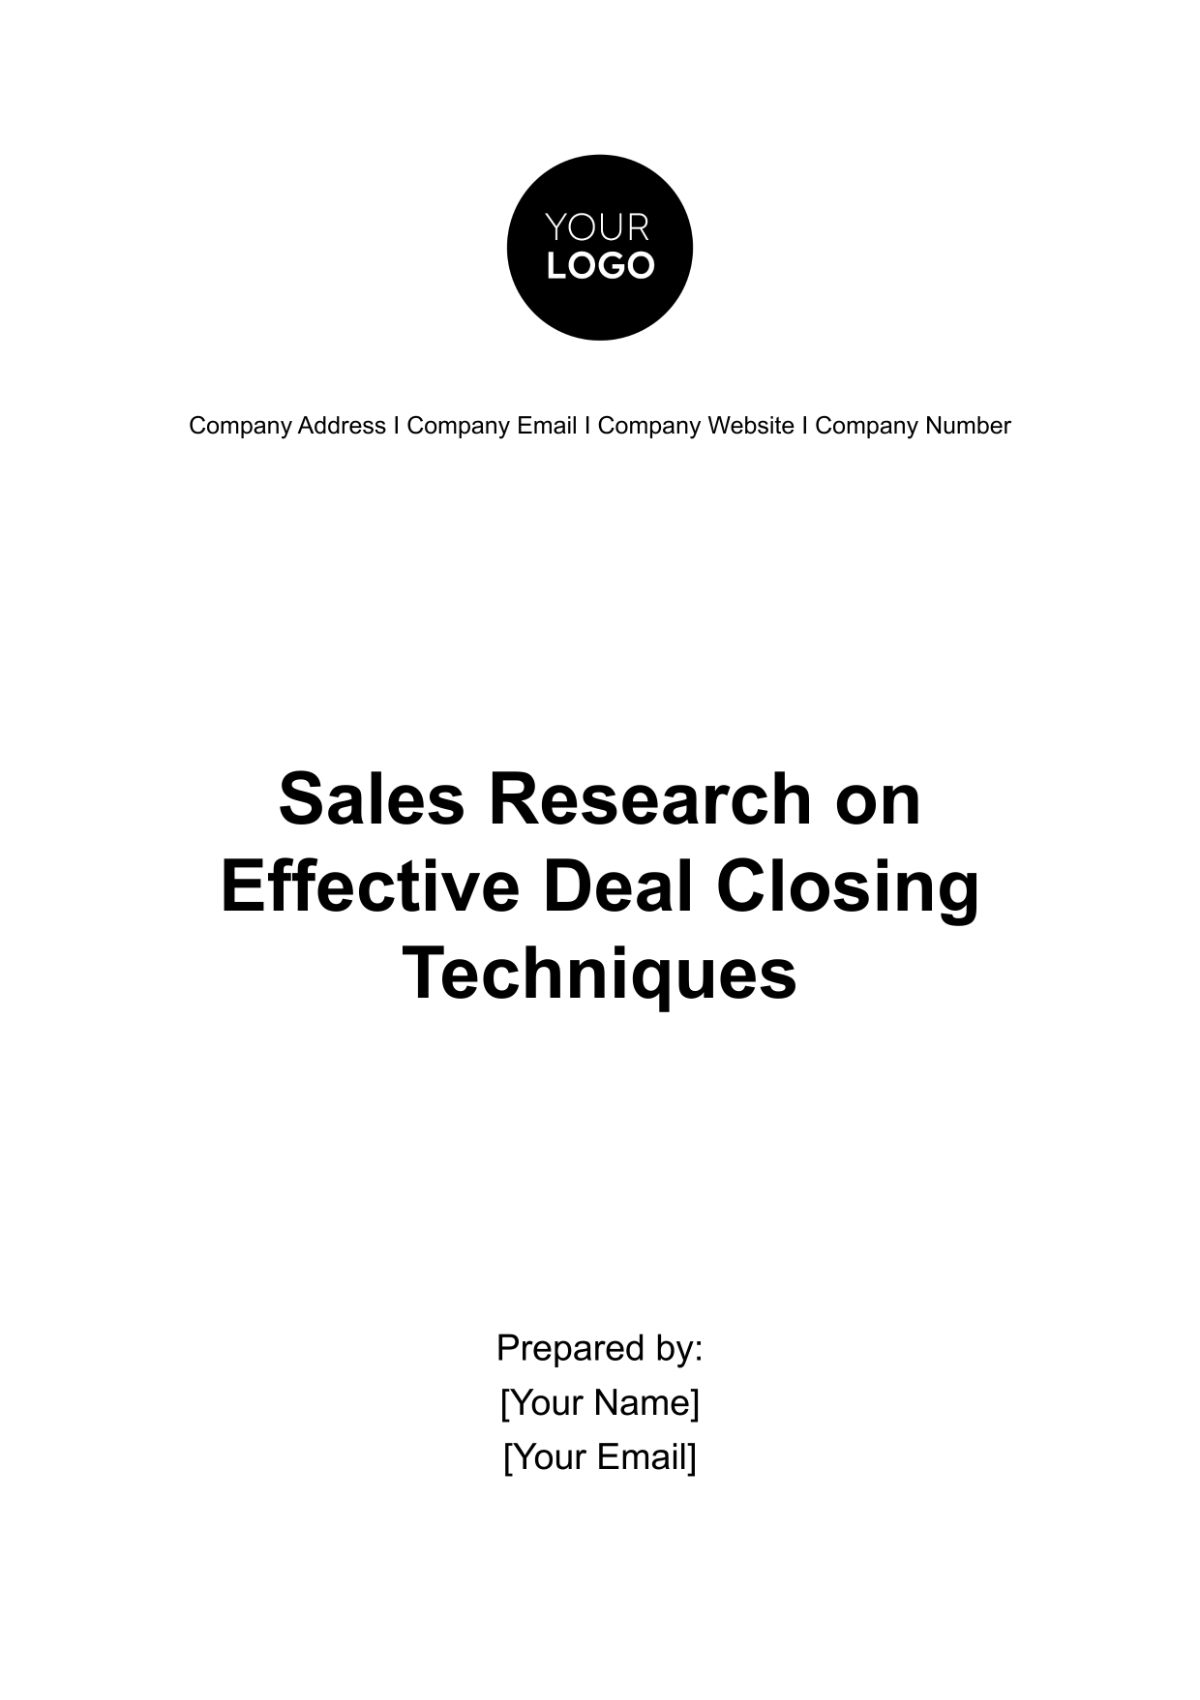 Free Sales Research on Effective Deal Closing Techniques Template